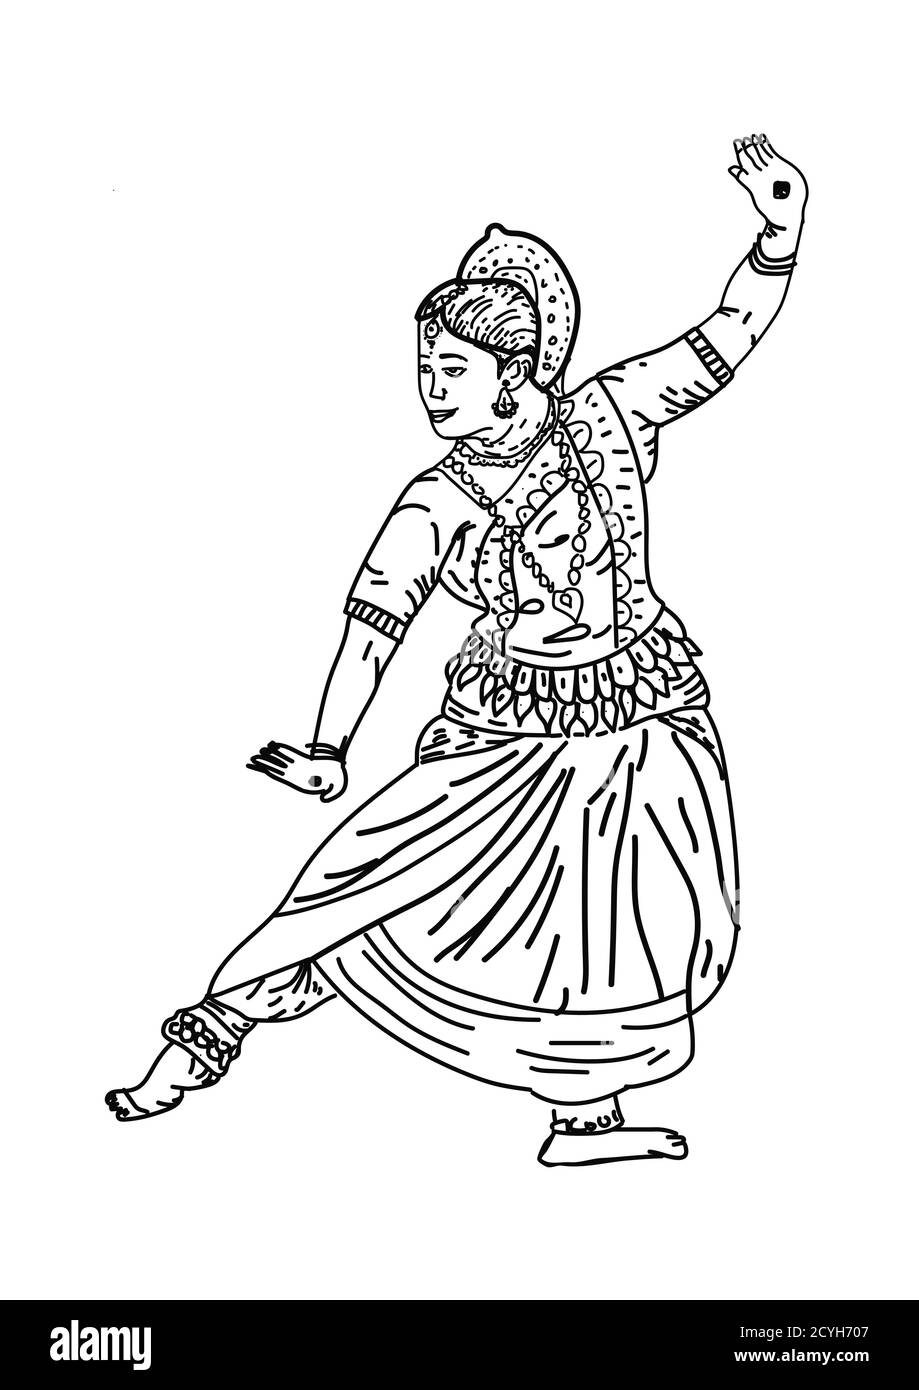 Buy ODISSI | Dance Souvenir Online Indic Inspirations – indic inspirations